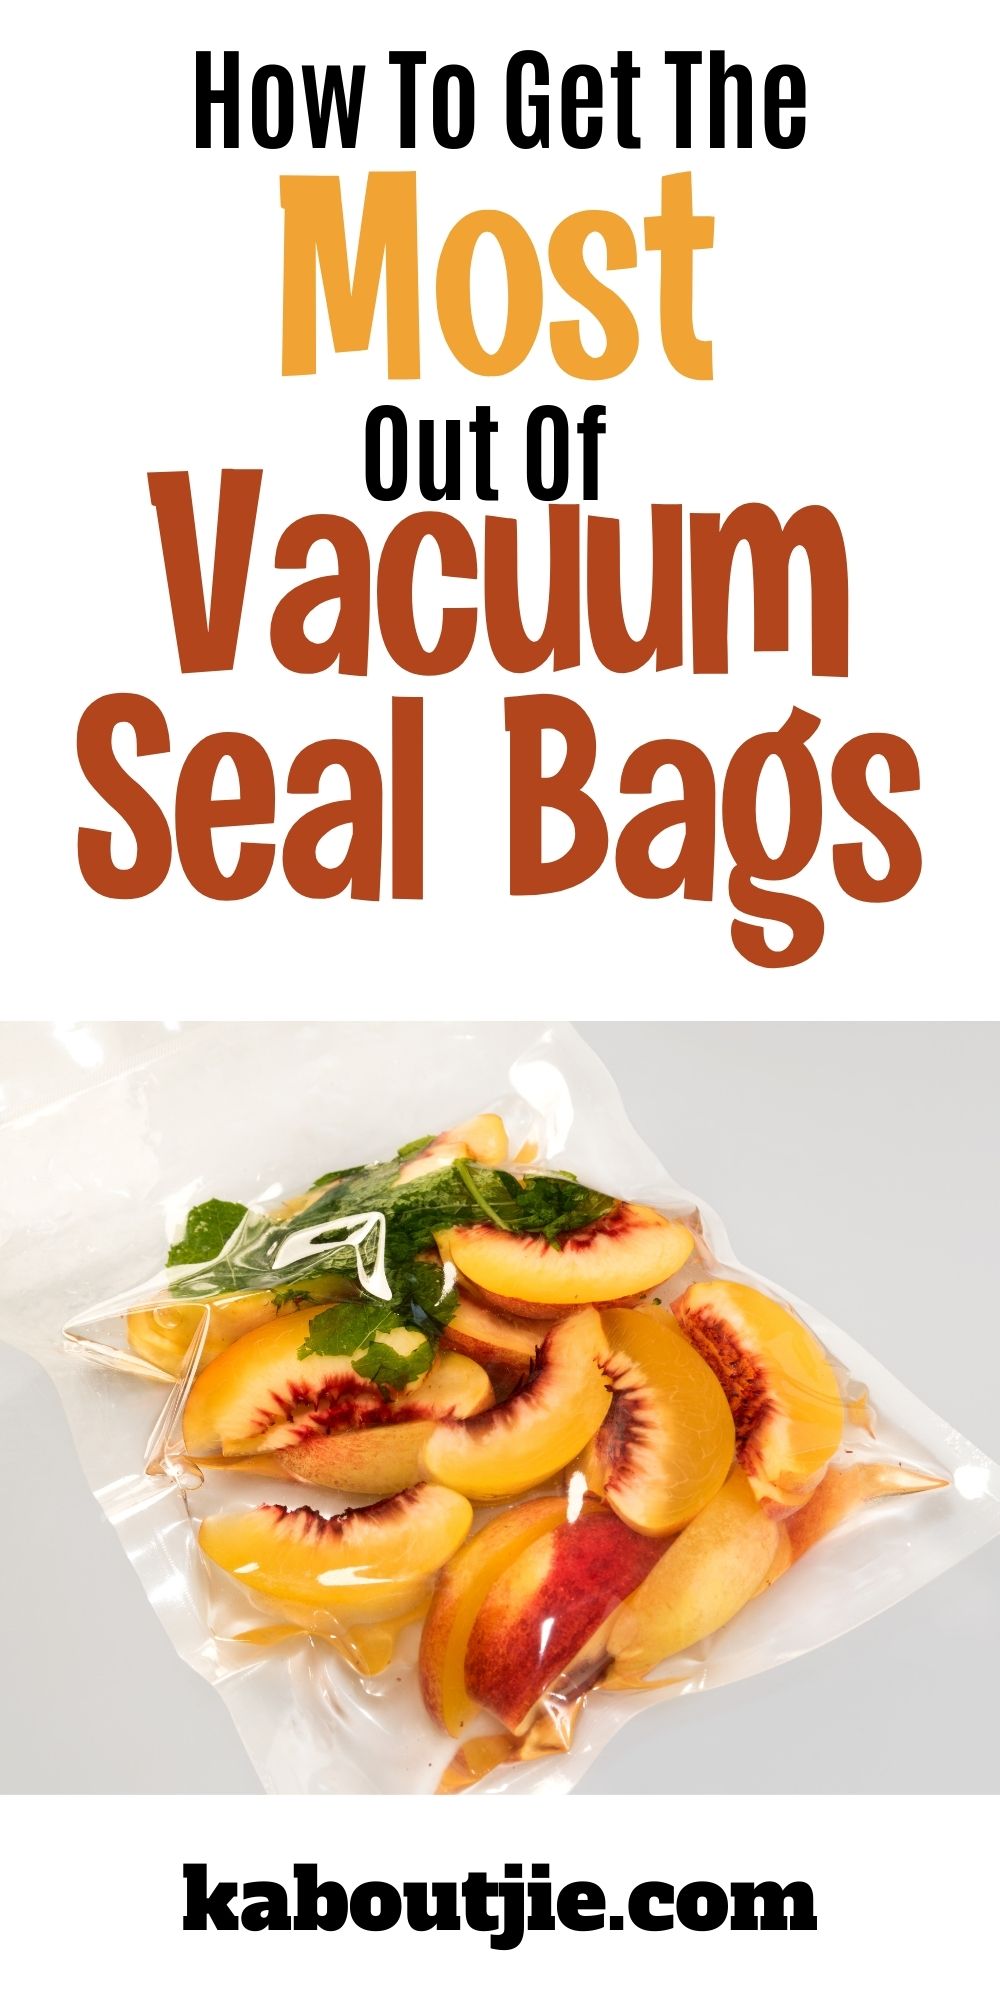 What to Keep in Vacuum-Sealed Bags